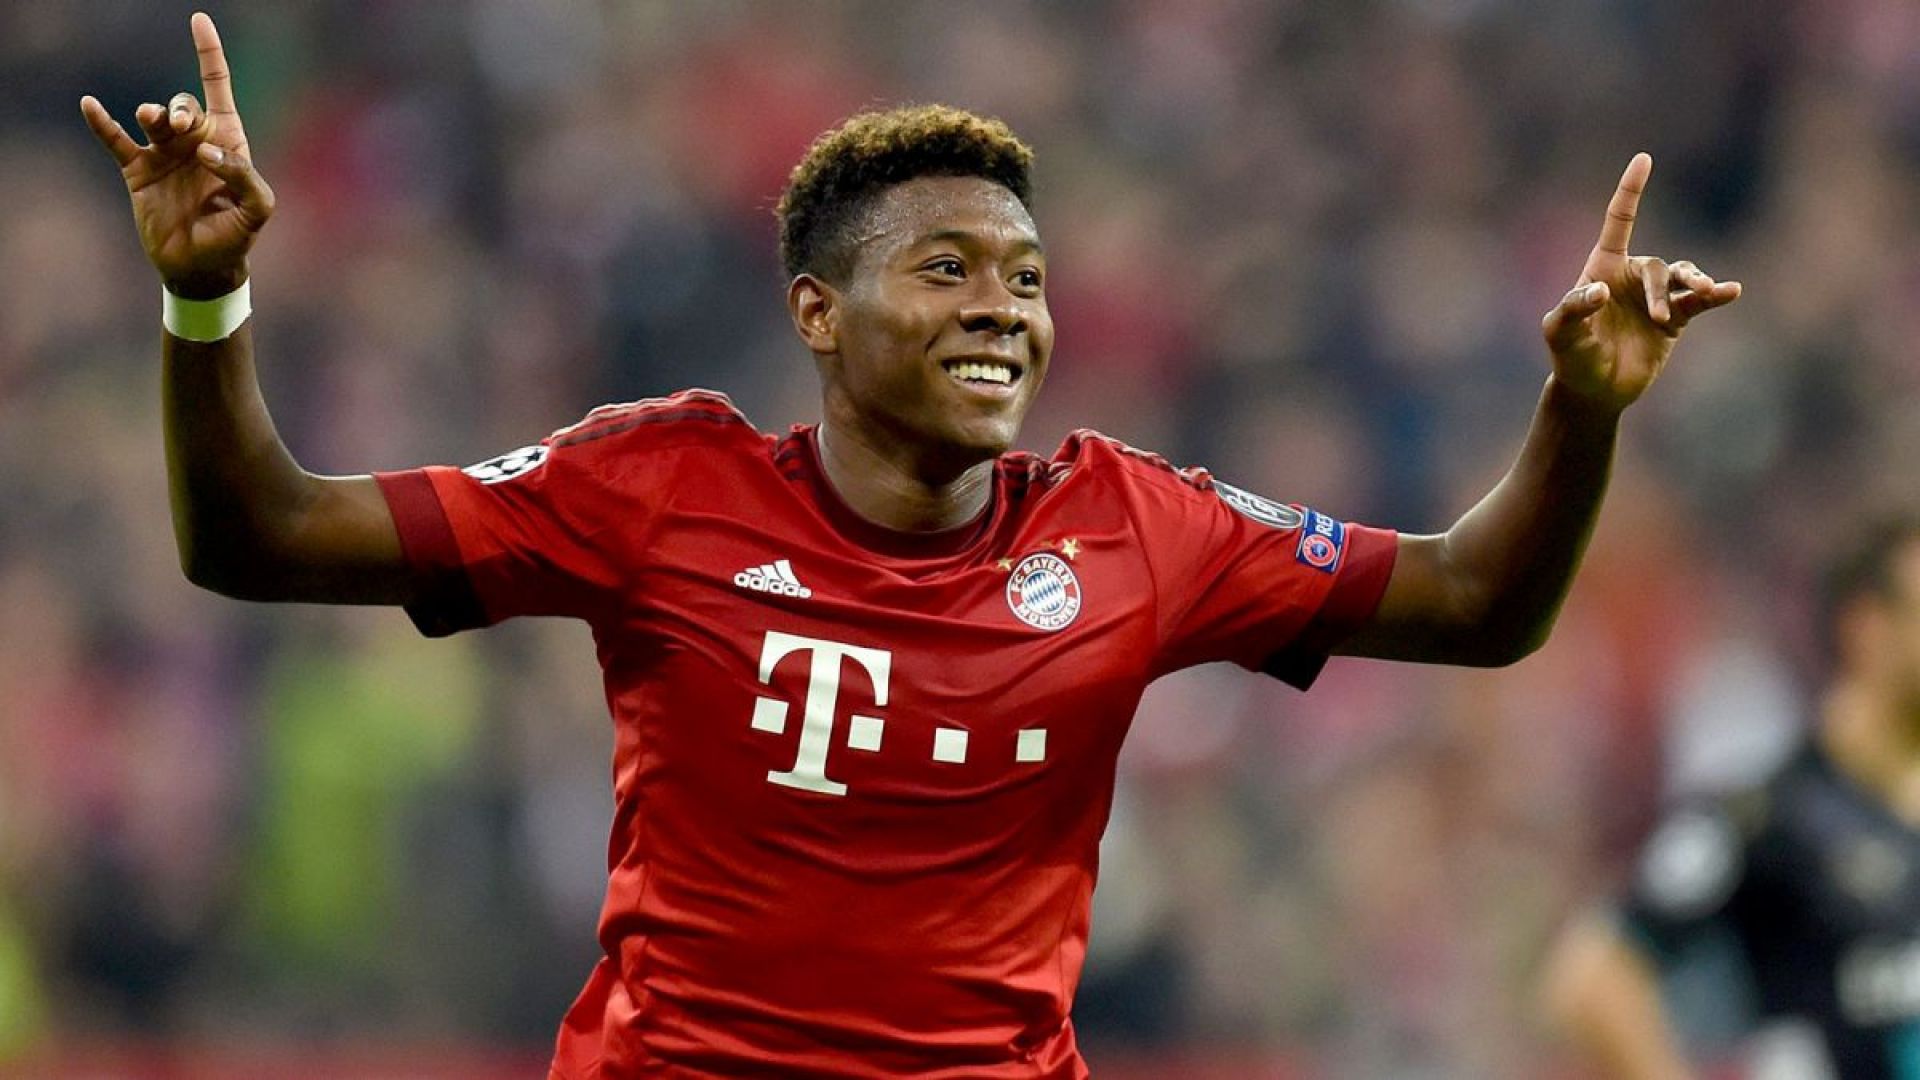 Manchester United look set to lose out on signing Bayern Munich star David Alaba